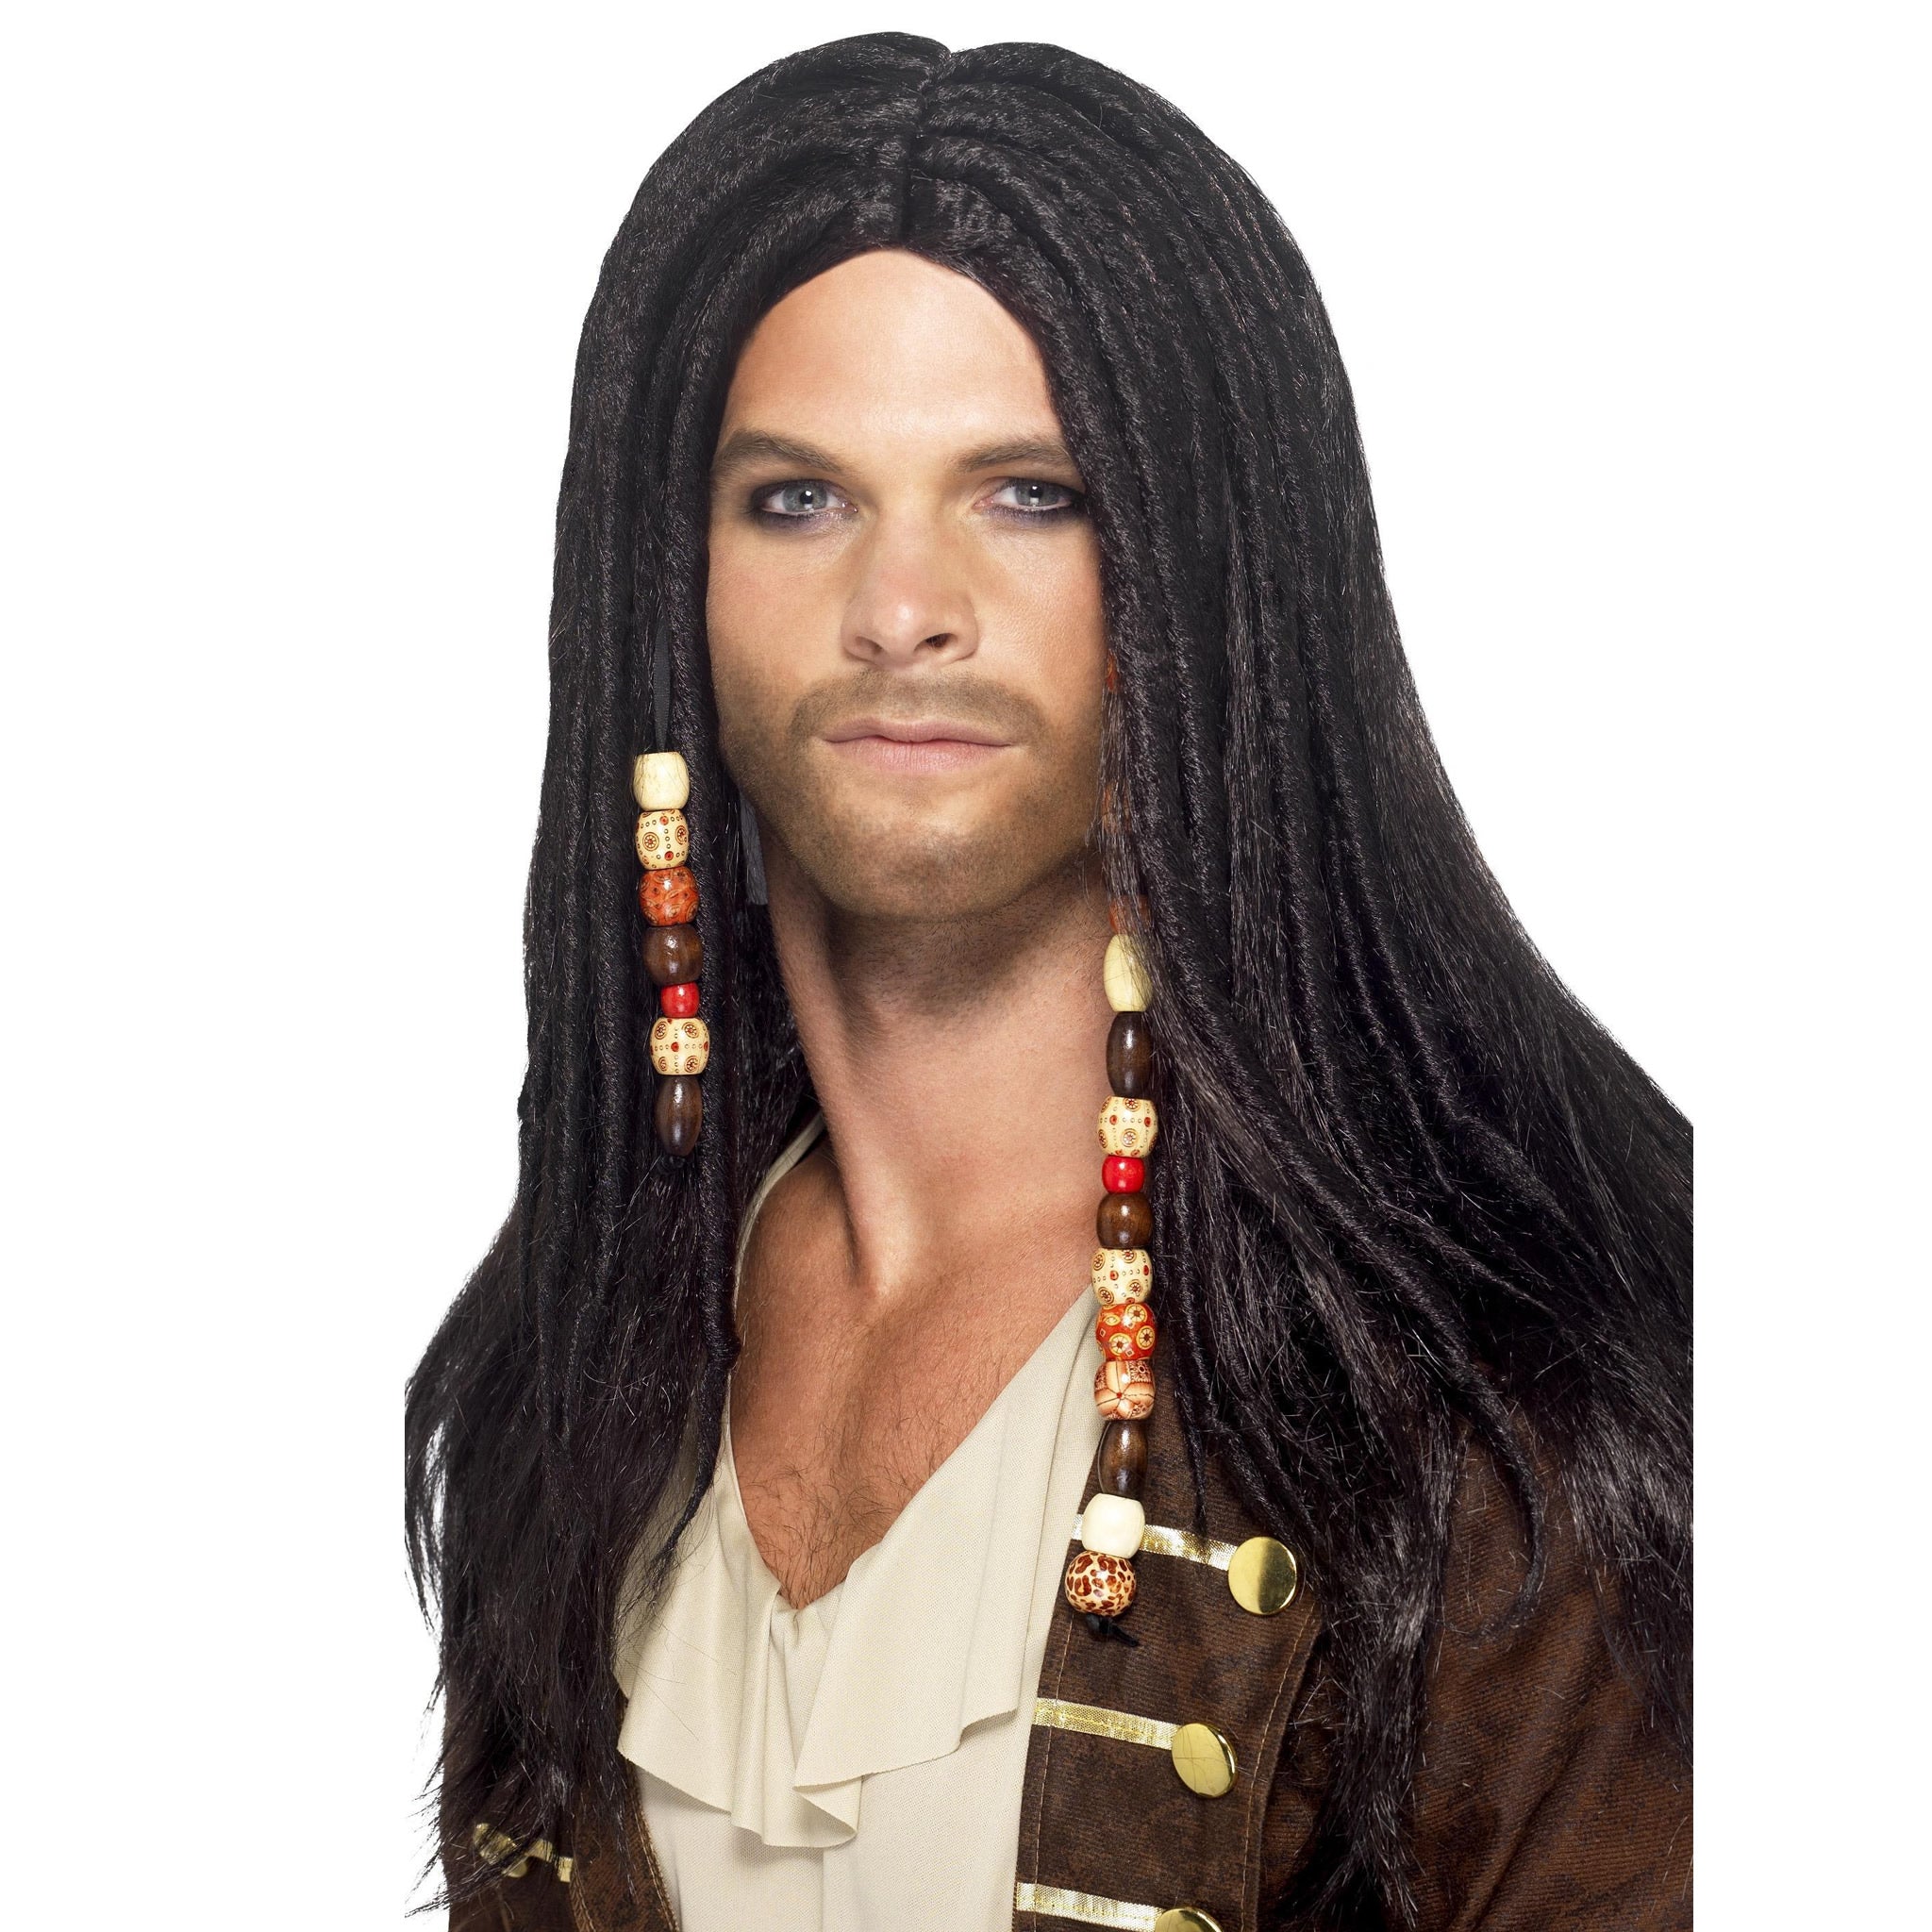 Buy Pirate Wig Black with Beads